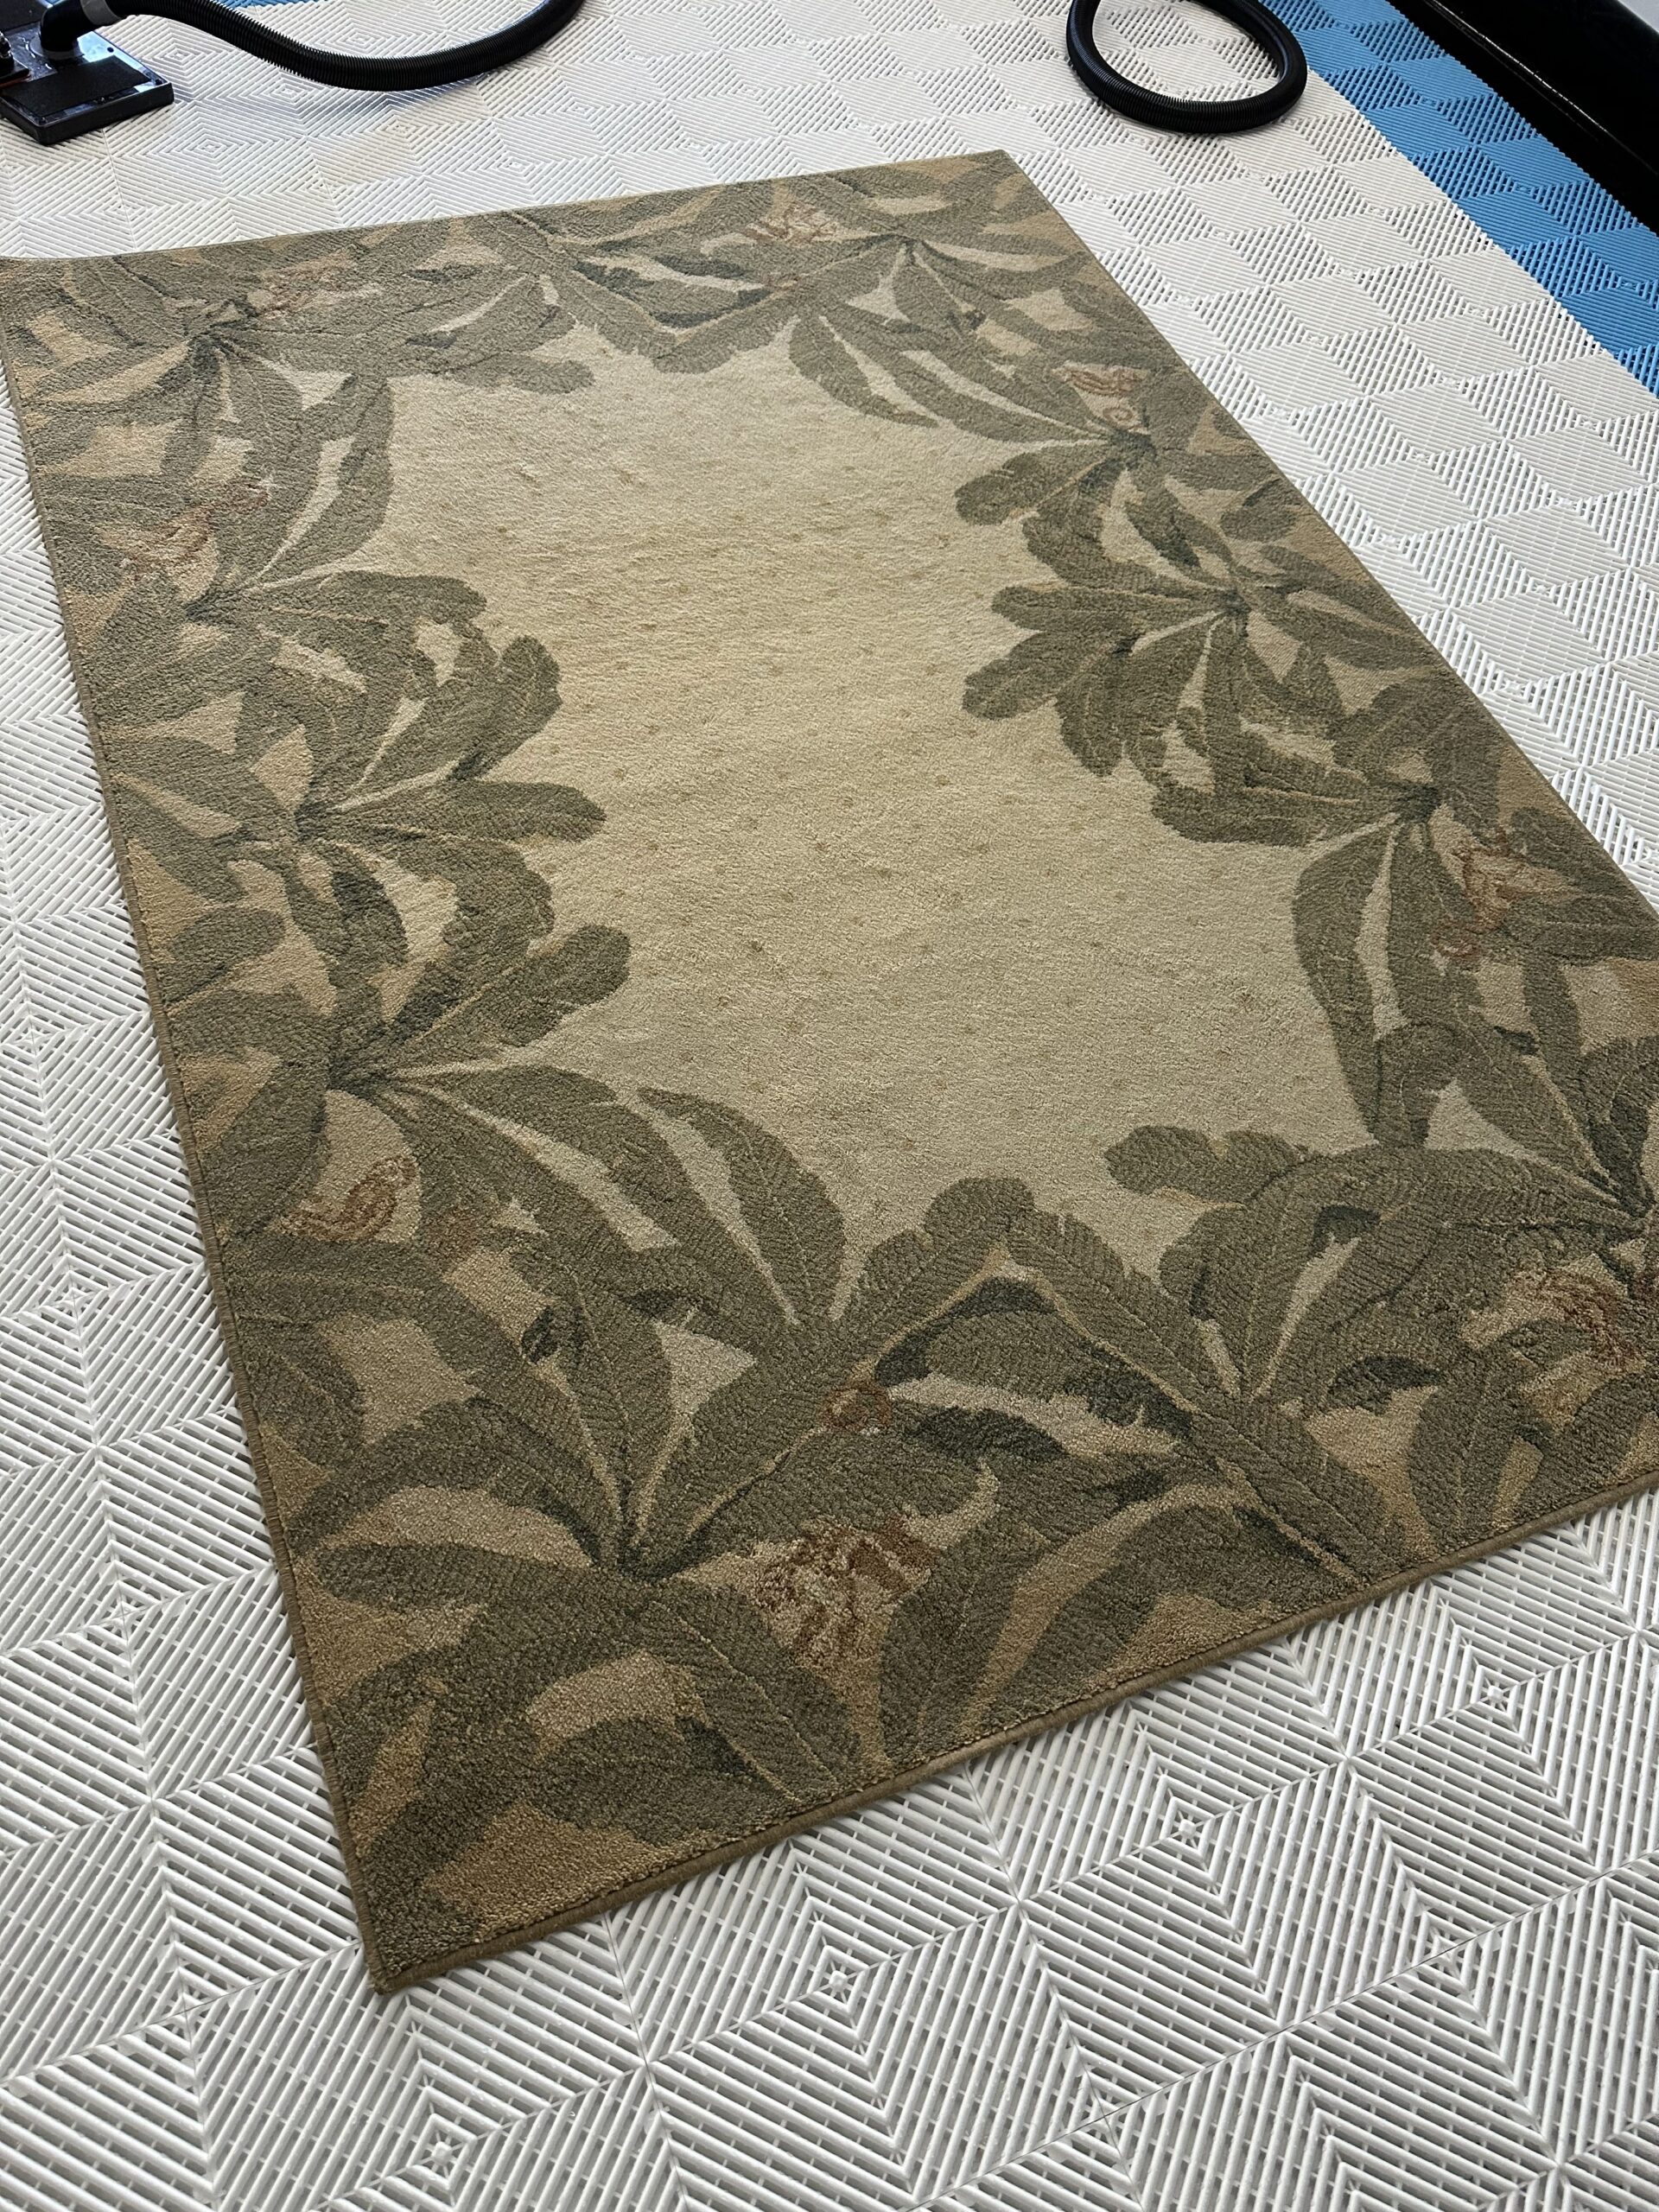 OC Rug Cleaning Services